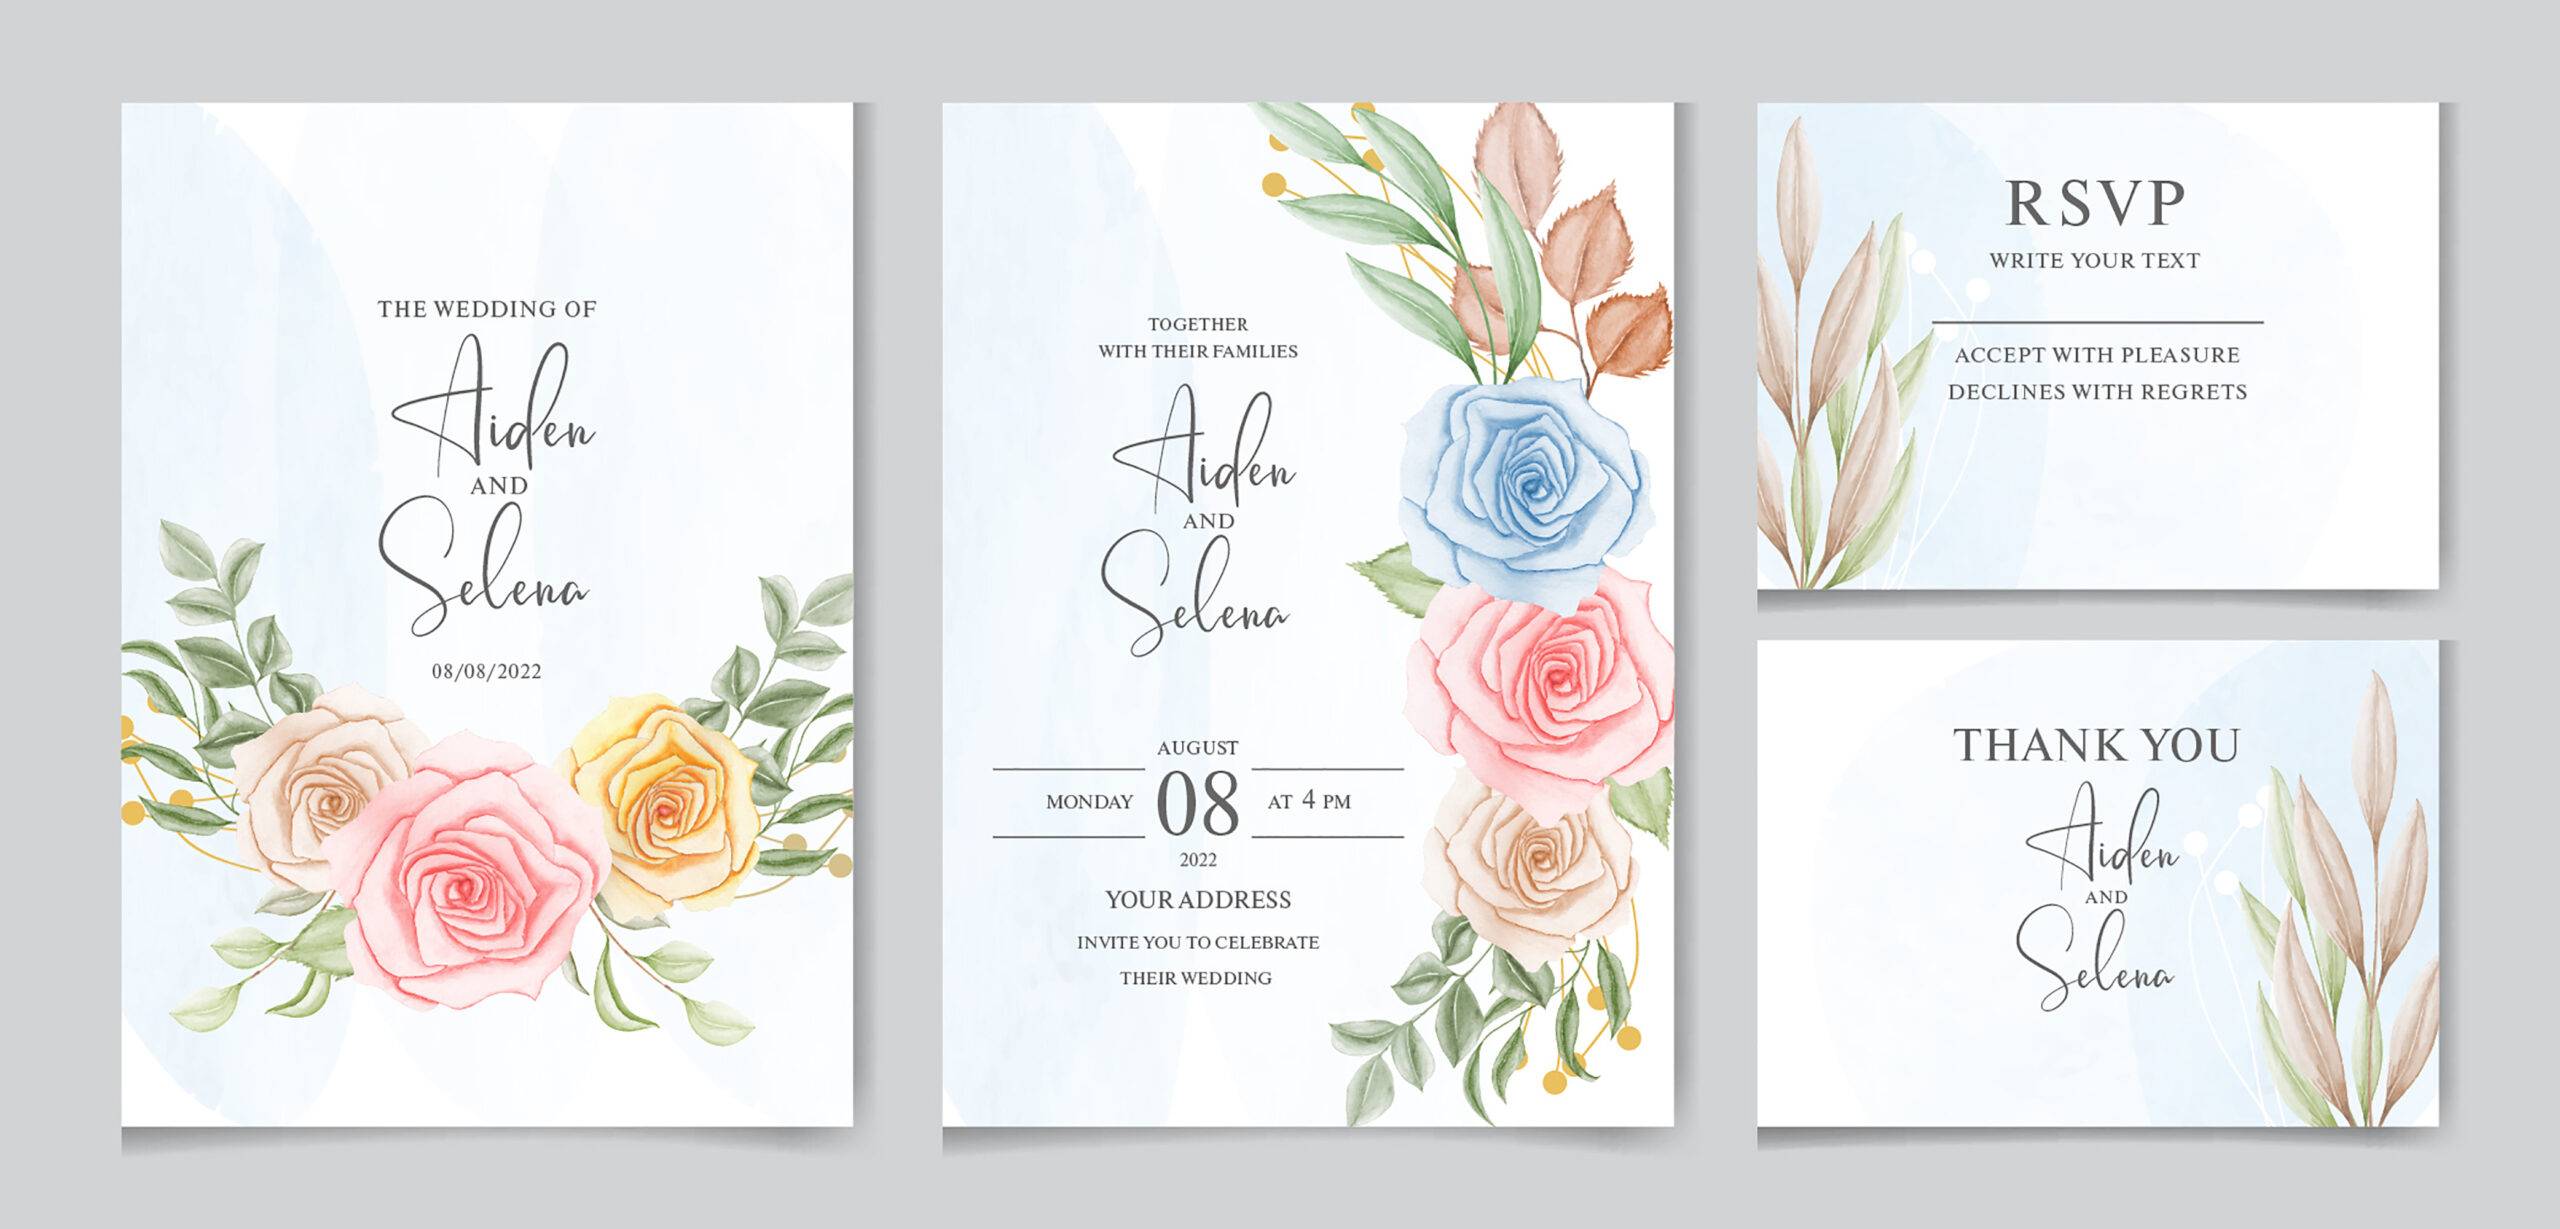 Wedding invitation card set template with flowers and leaves watercolor